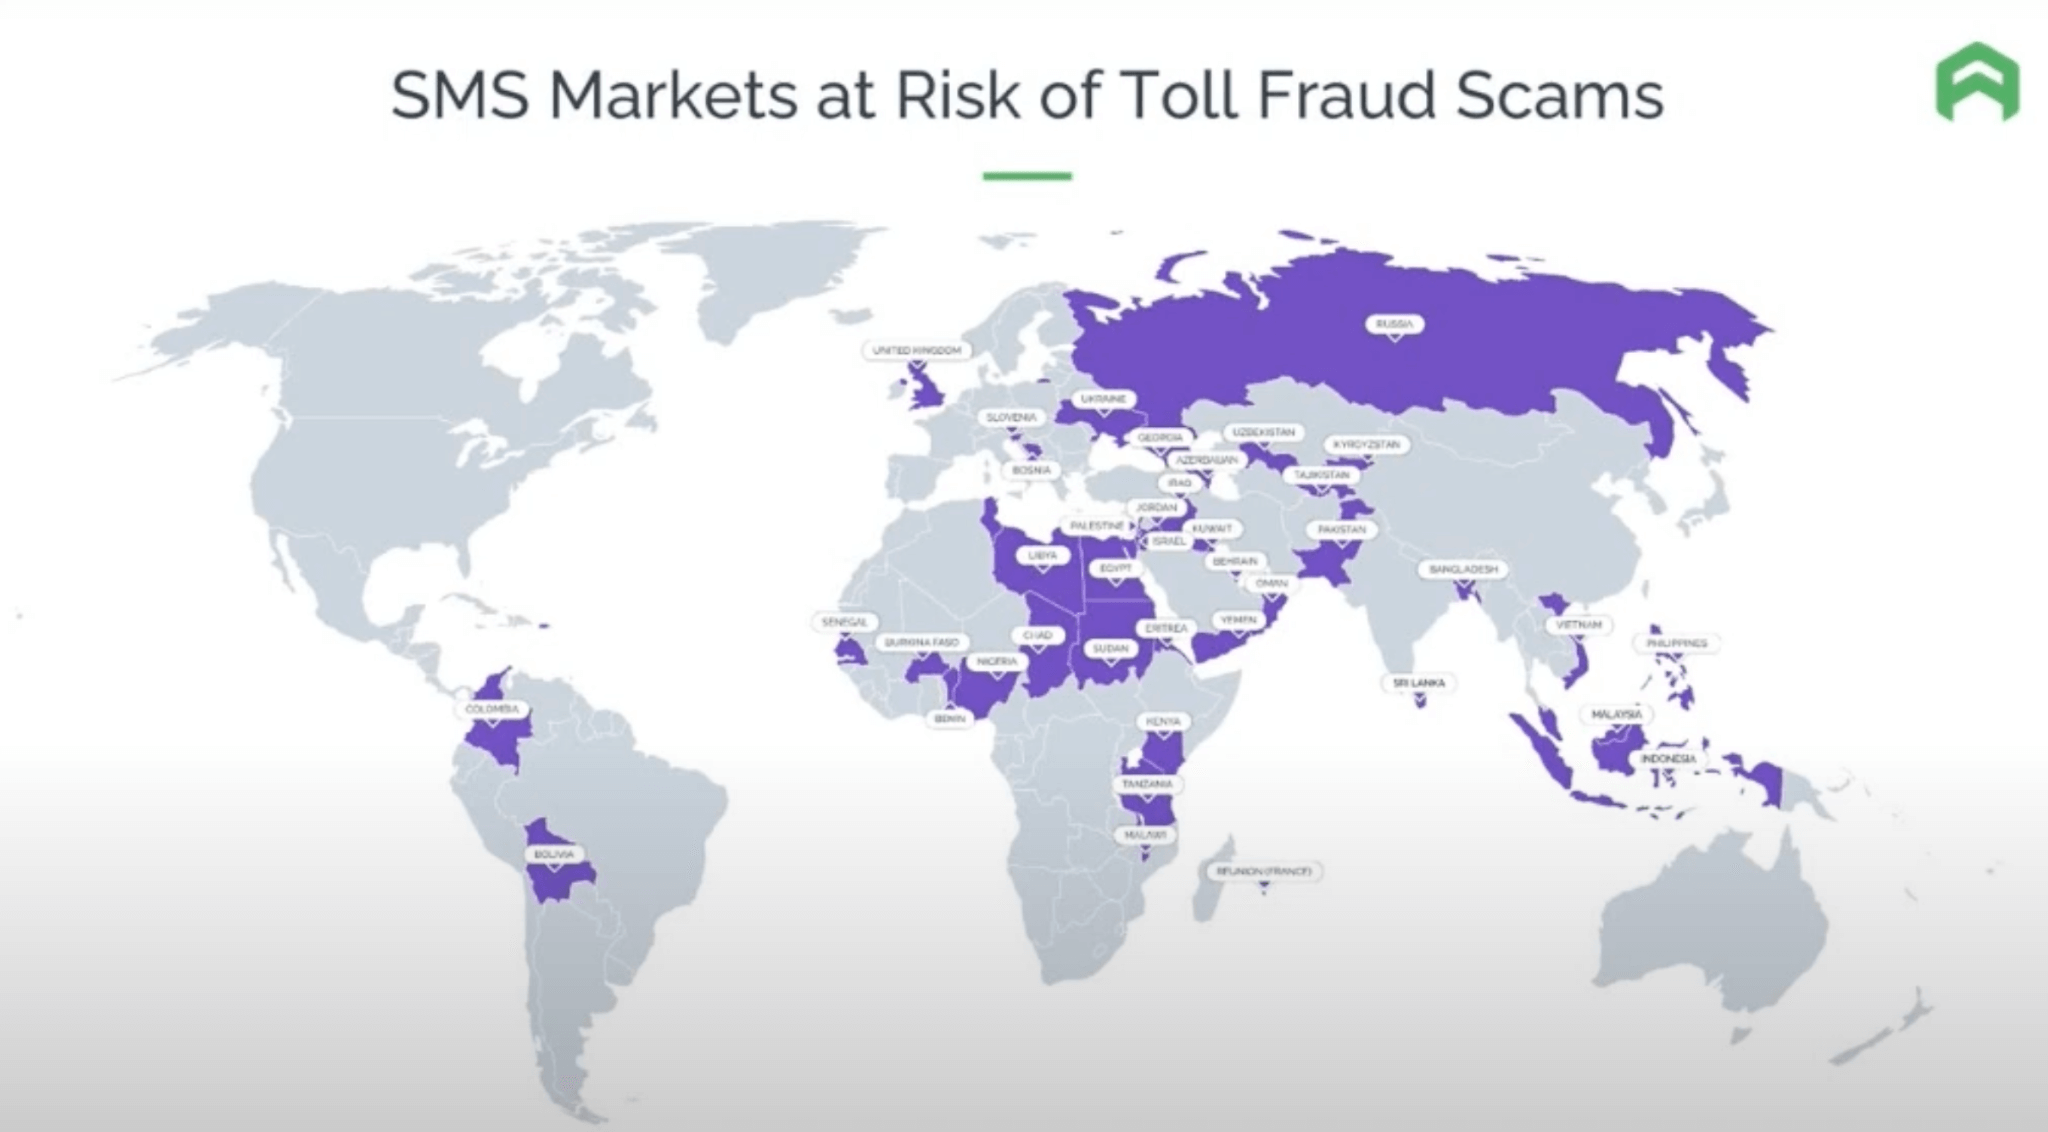 SMS markets at risk of toll fraud scams